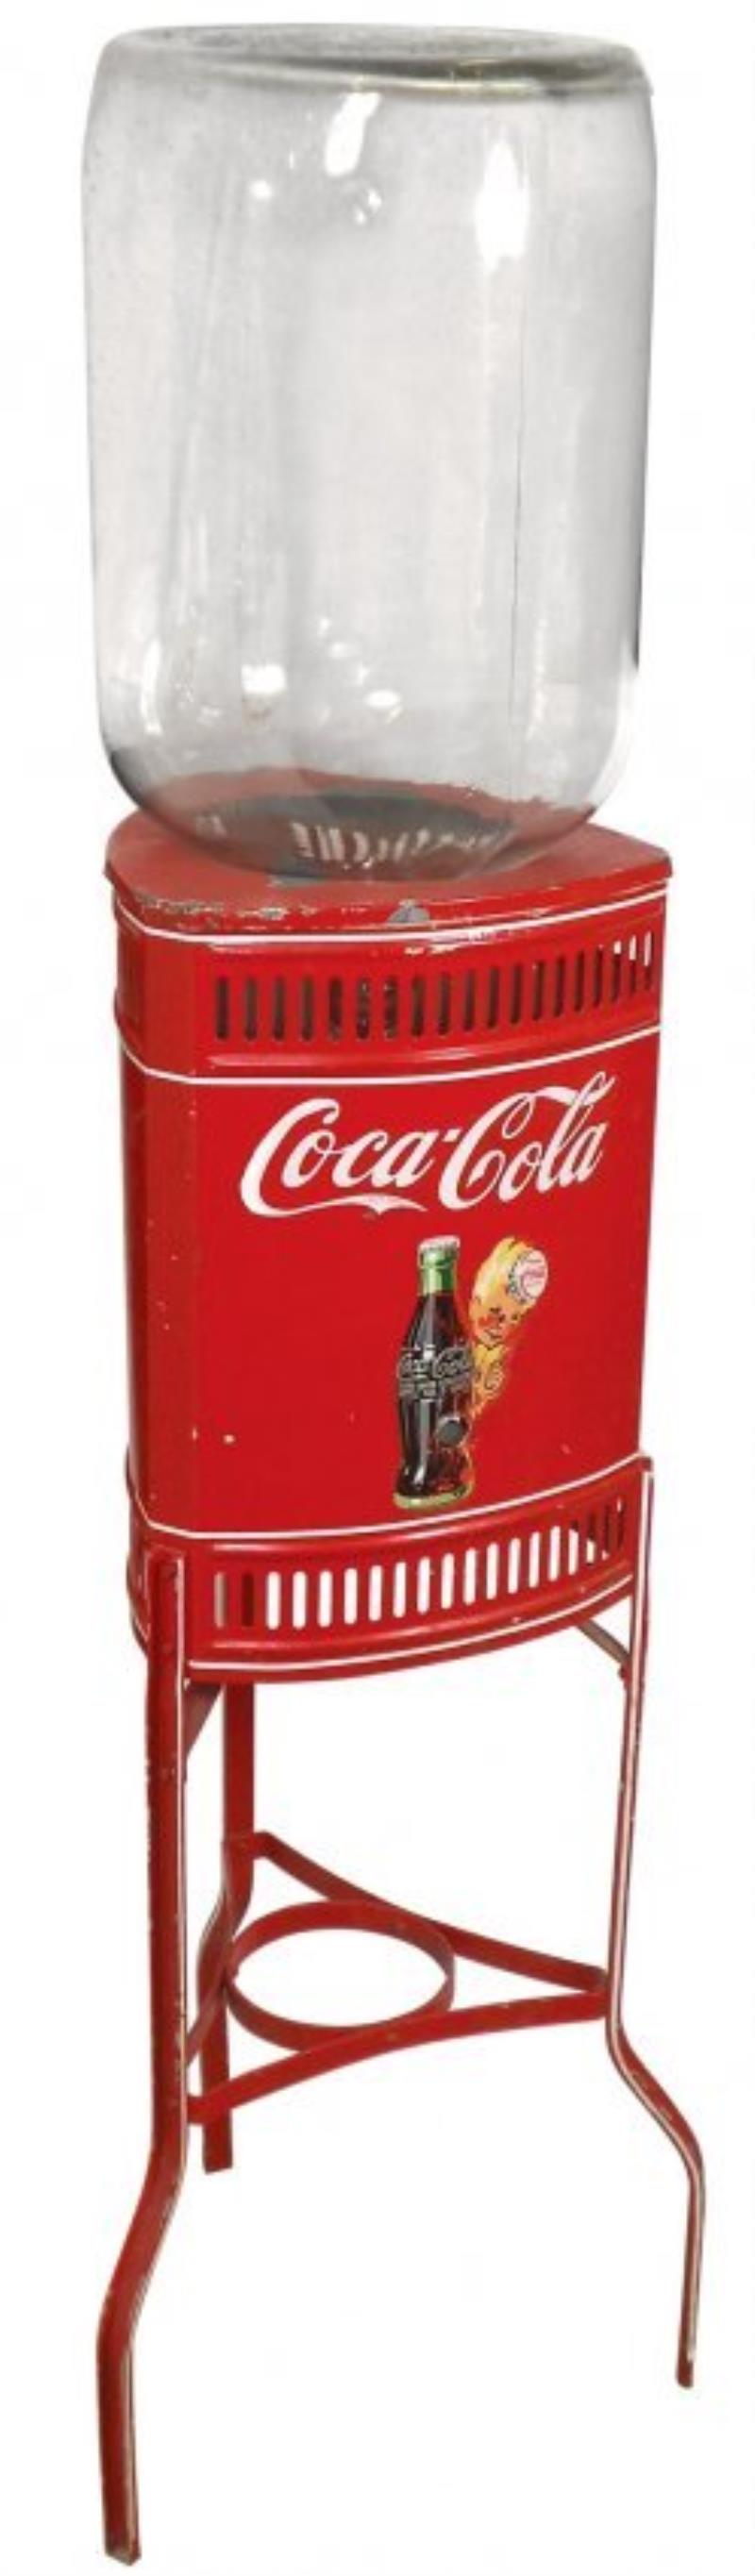 Coca-Cola water cooler, early triangular-shaped m